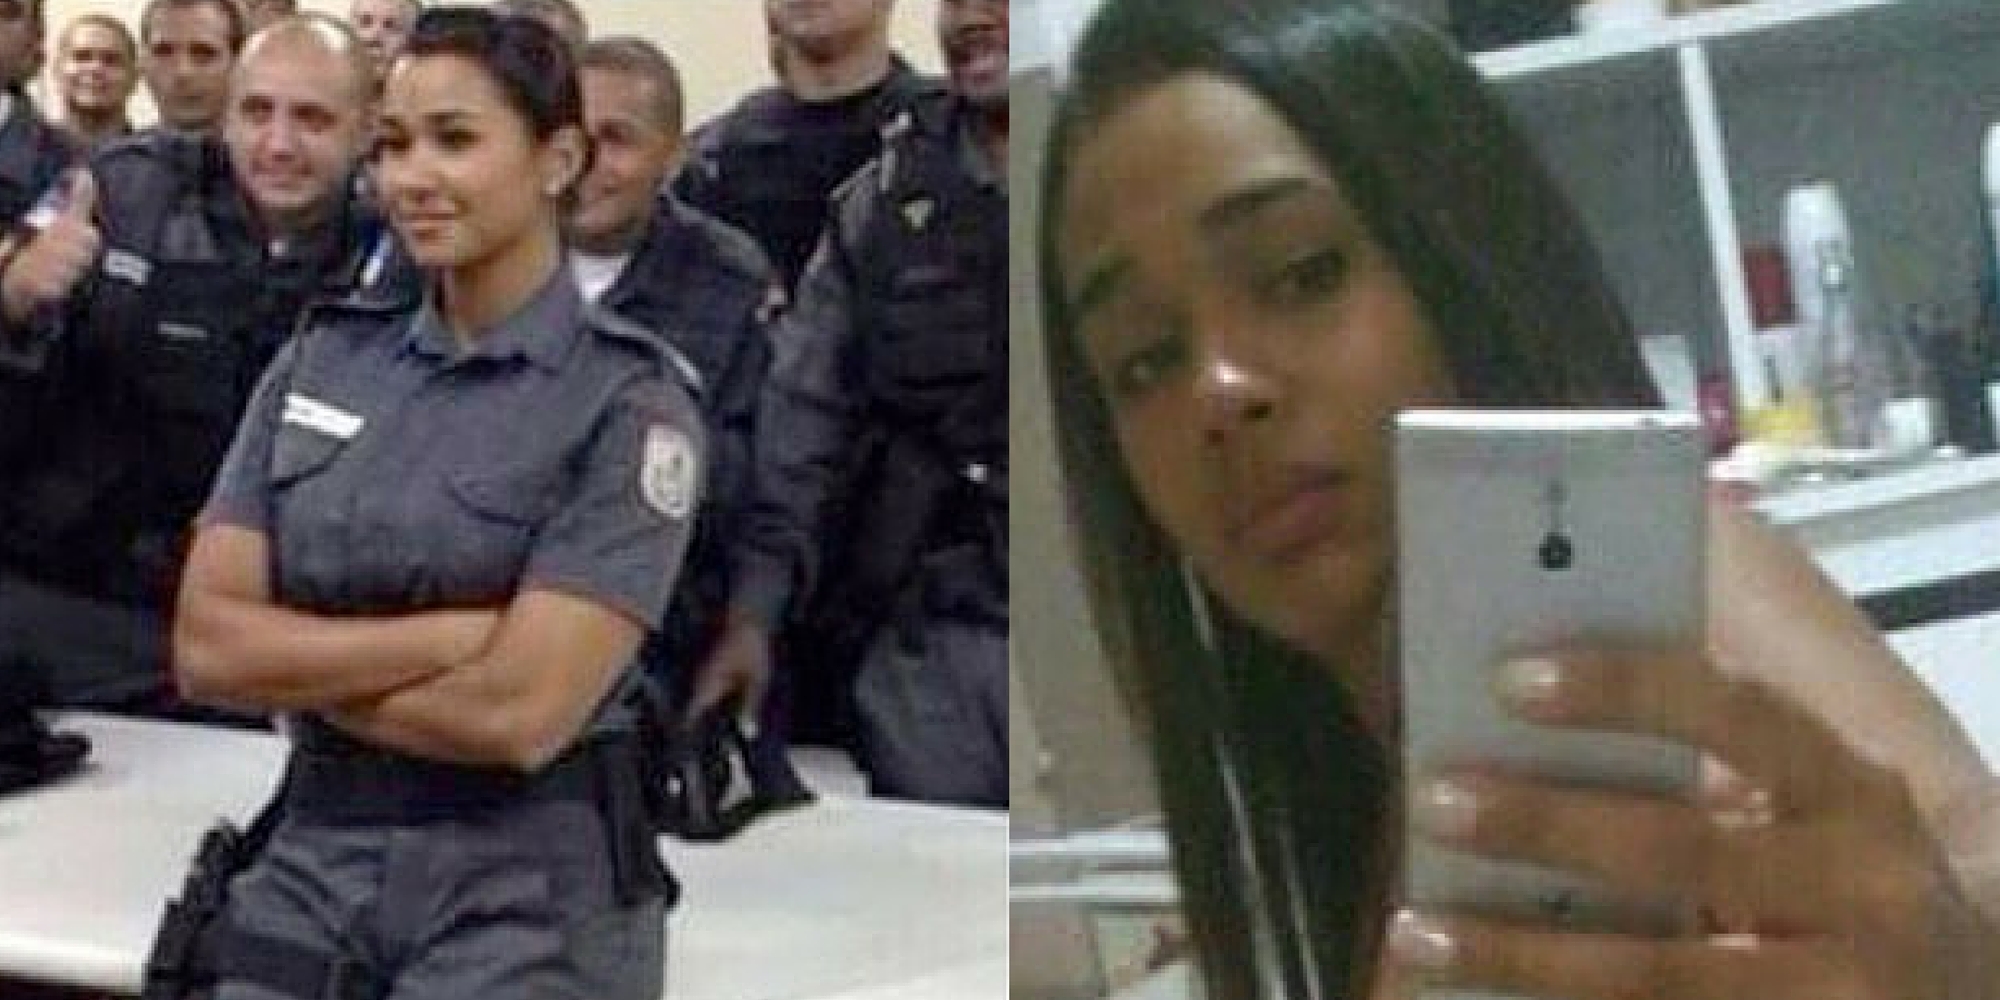 SEXY BRAZILIAN COP ARRESTS GANG LEADER, GANG RESPONDS BY LEAKING JULIA LIERS NAKED PICS